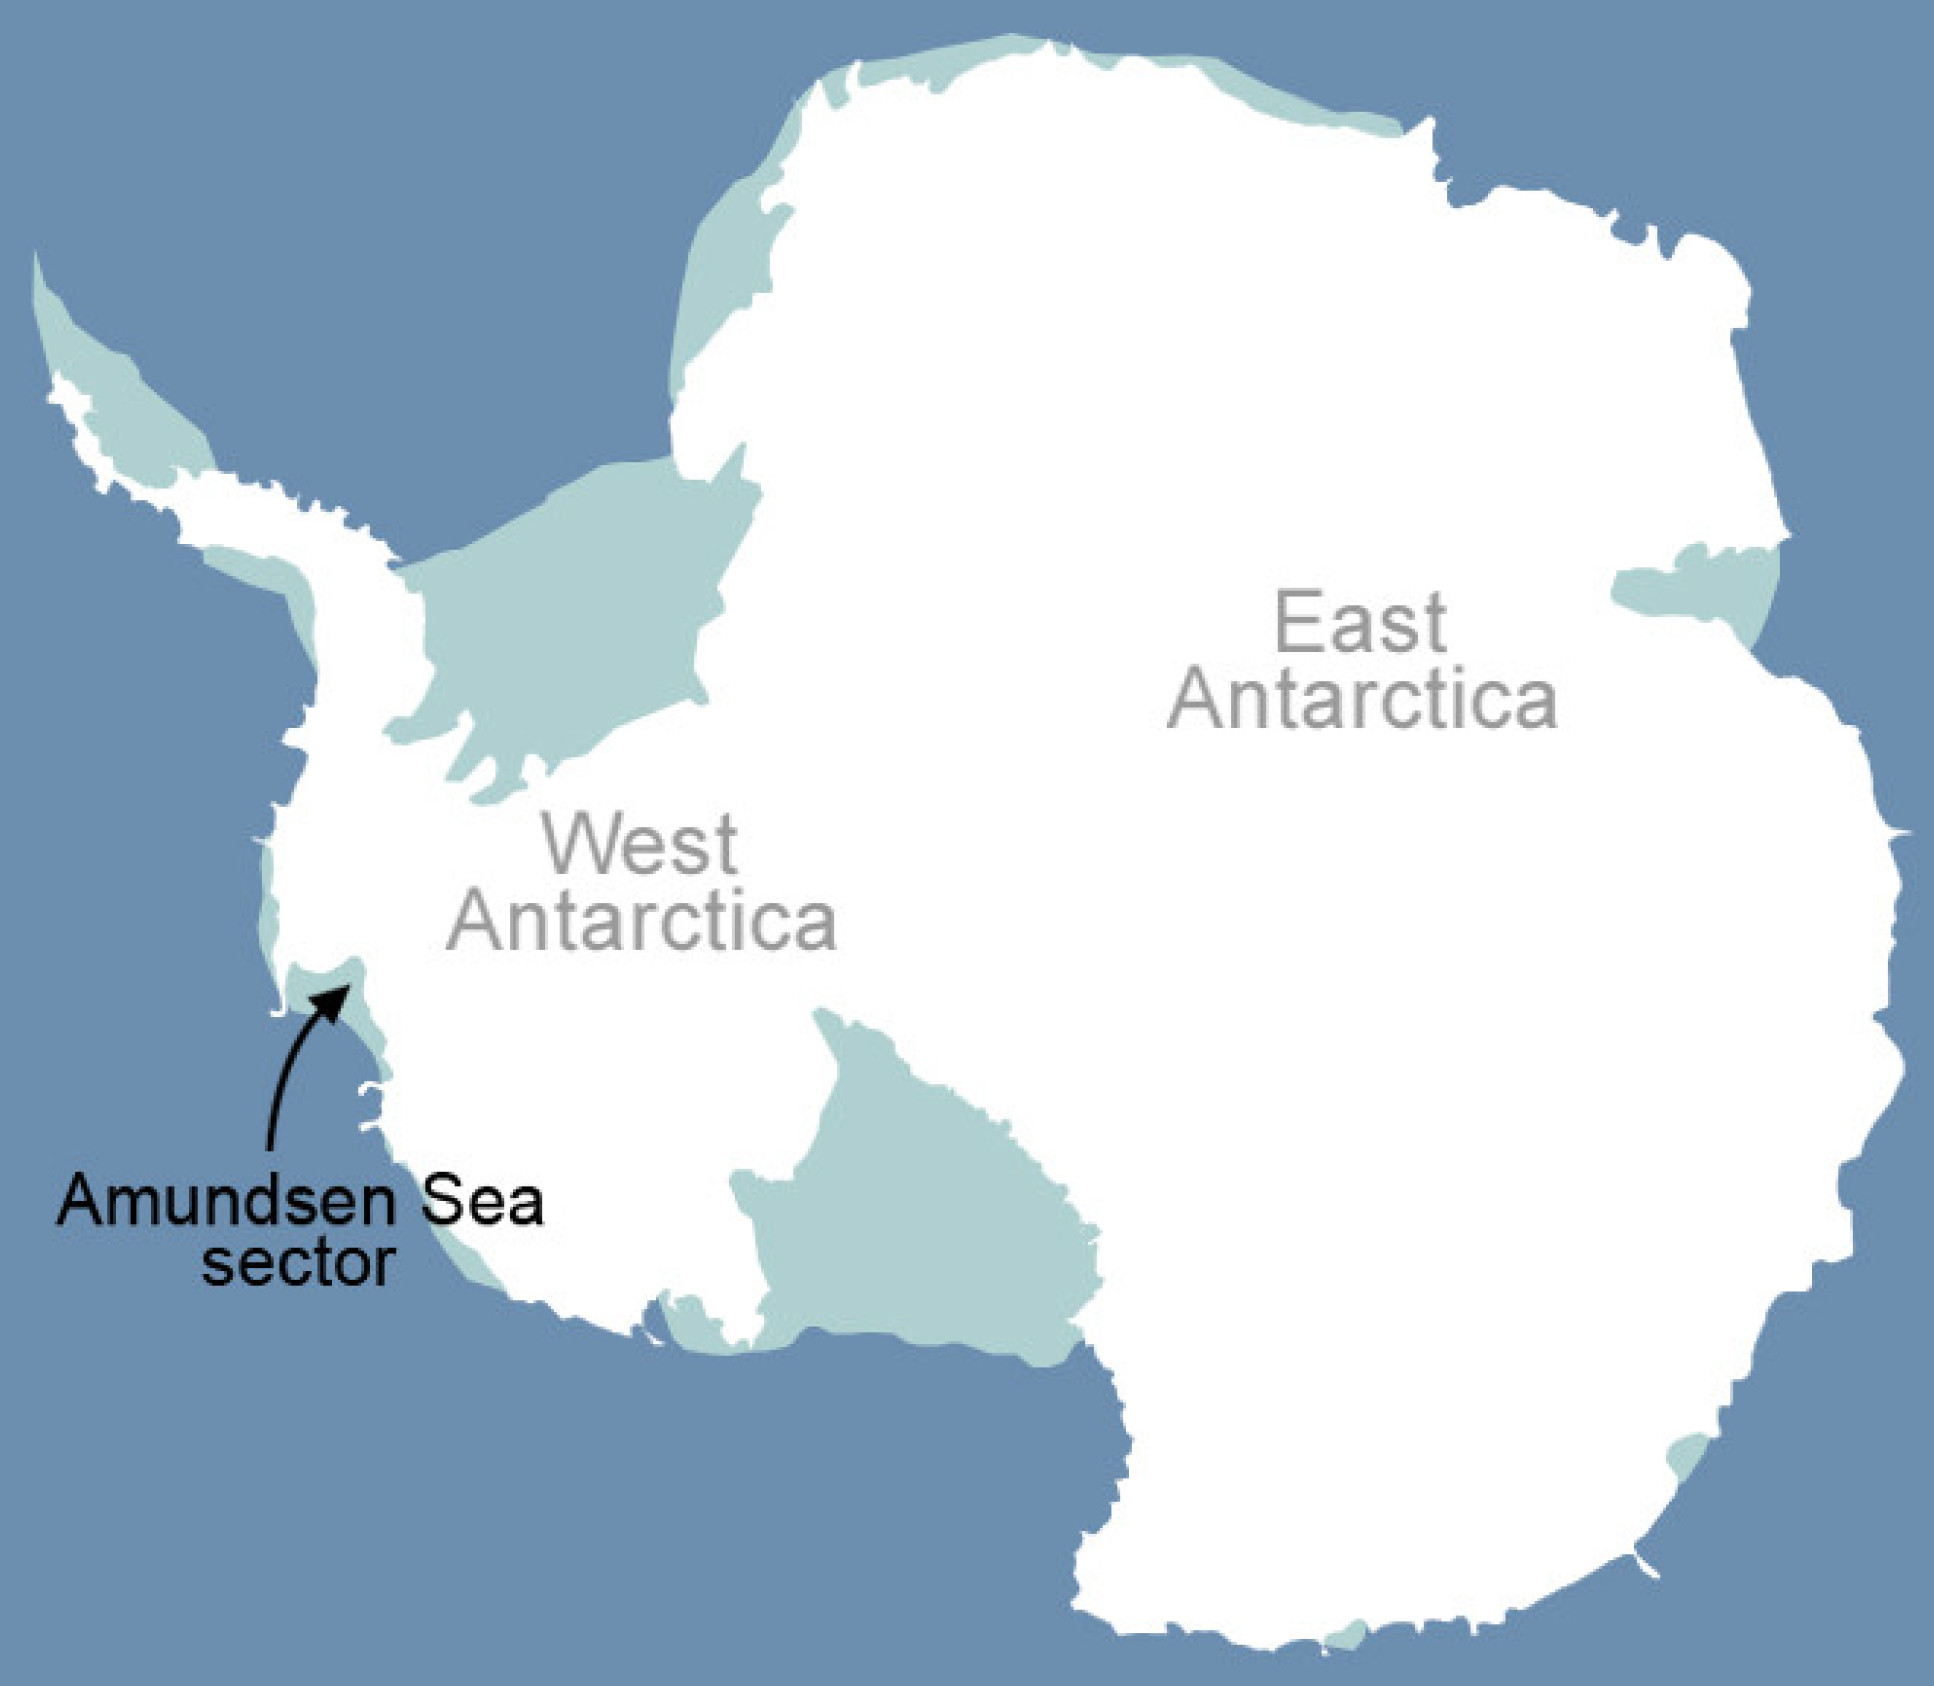 Map showing the West and East Antarctic Ice Sheets. A label shows the the adjacent Amundsen Sea, to which the melting glacier ice flows